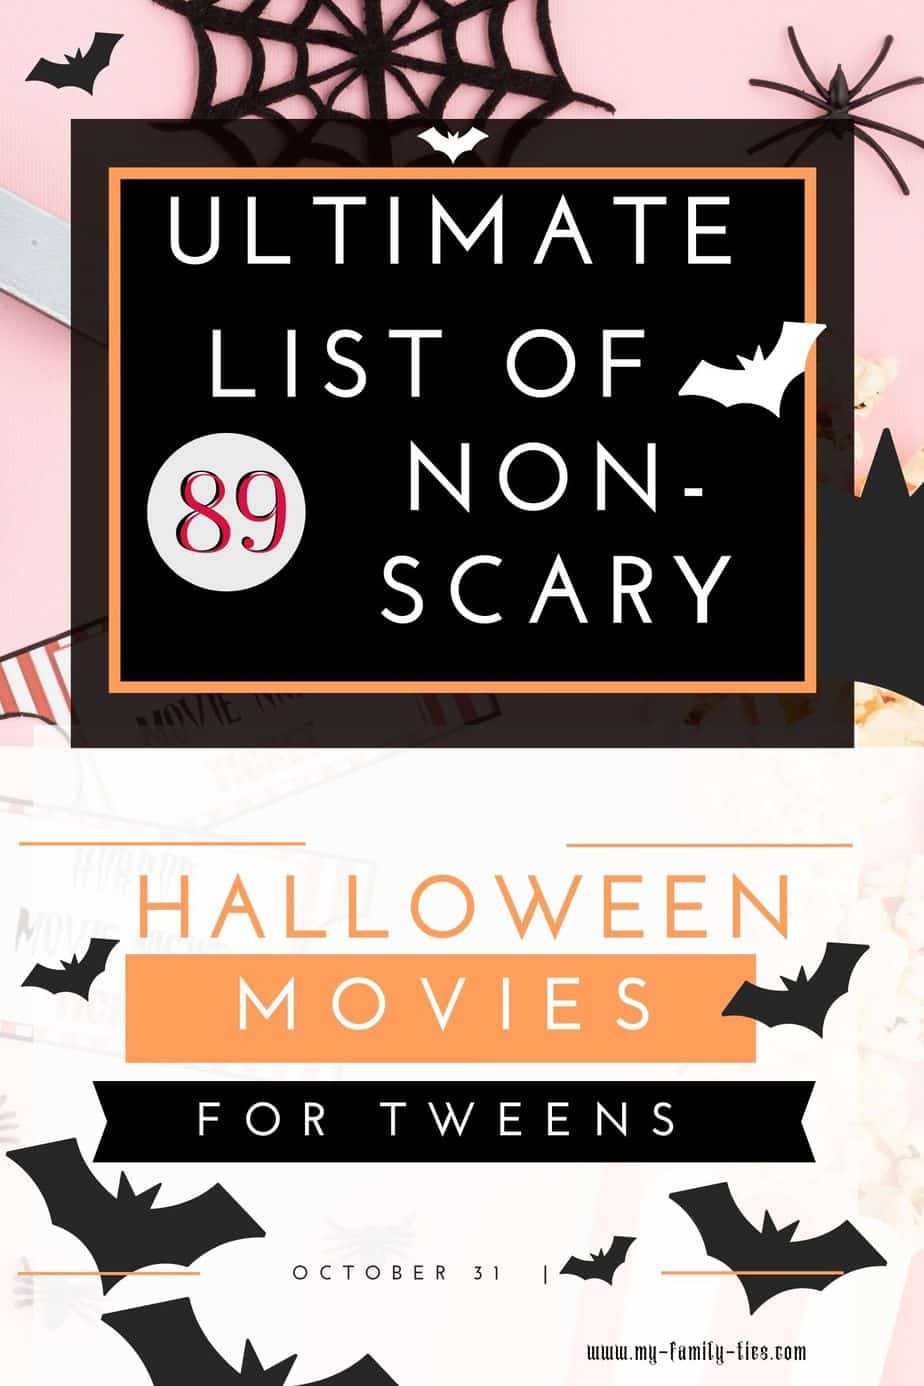 Ultimate list of non-scary Halloween movies for tweens, teens and adults.
89 non-scary movies
My Family Ties 